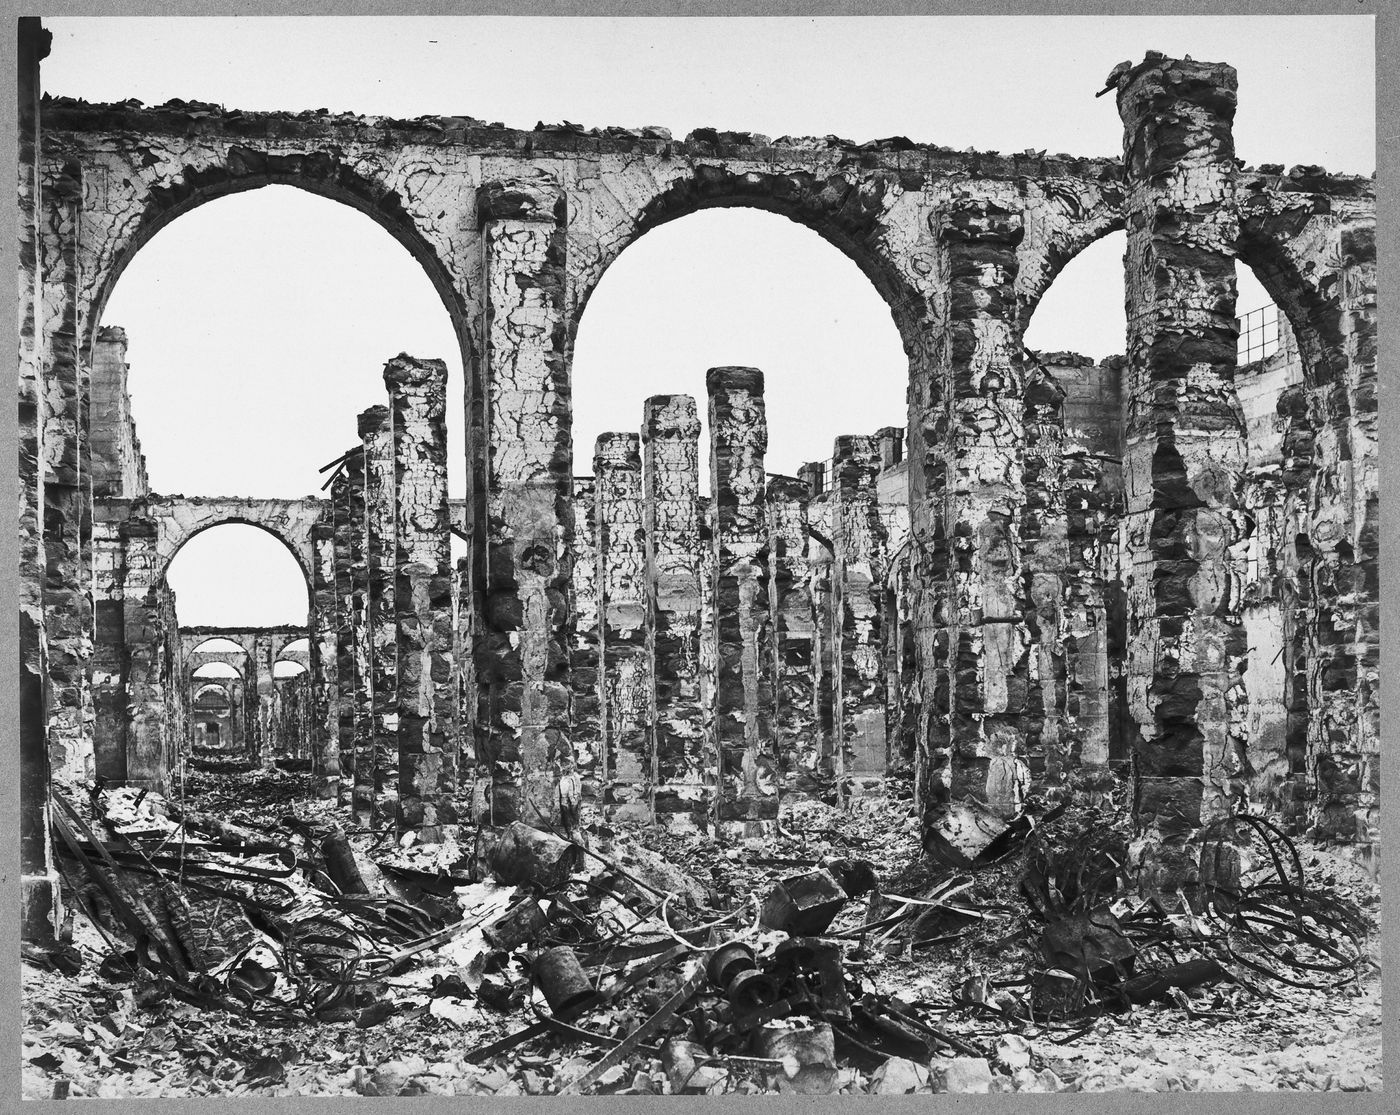 View of the ruins of the interior arsenal of Grenier d'abondance after the Paris Commune, Paris, France